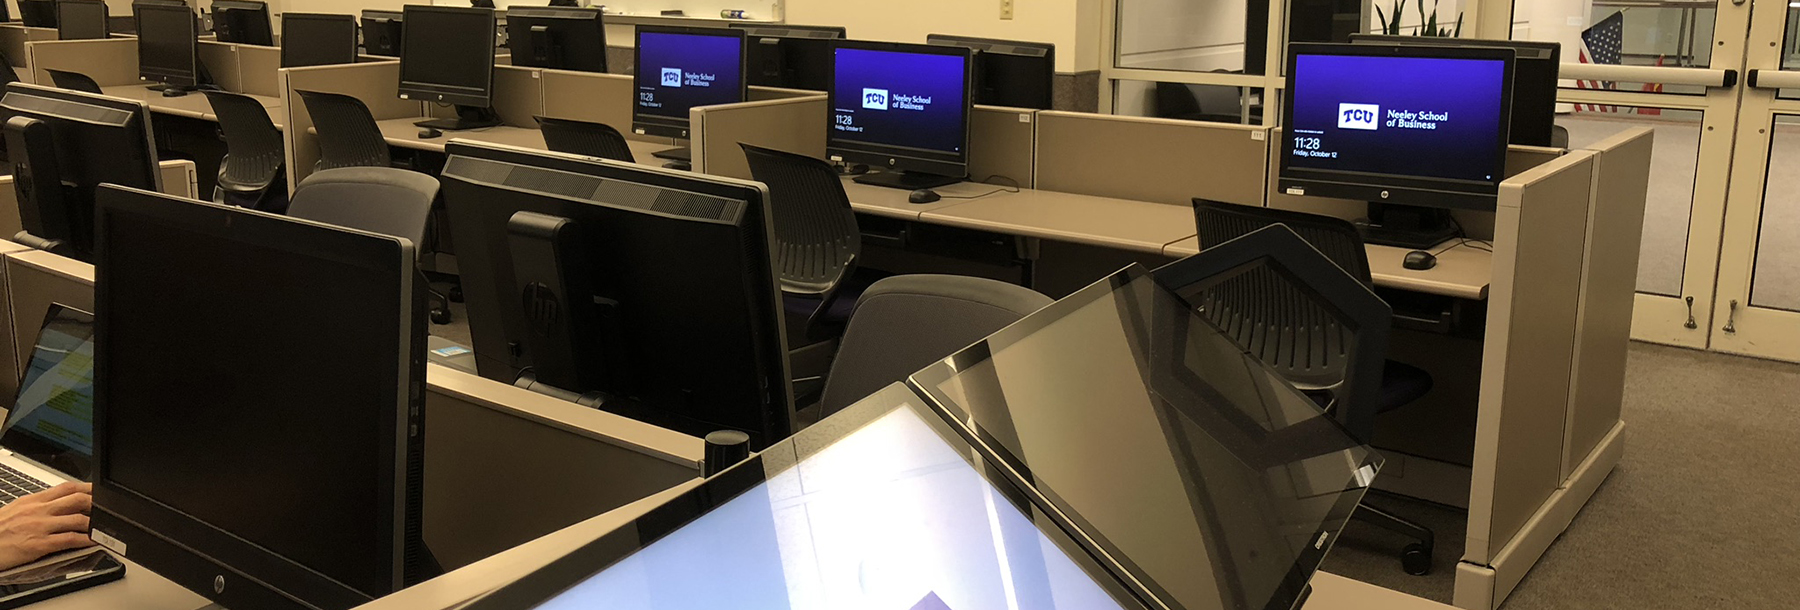 Section Image: Computer Lab 